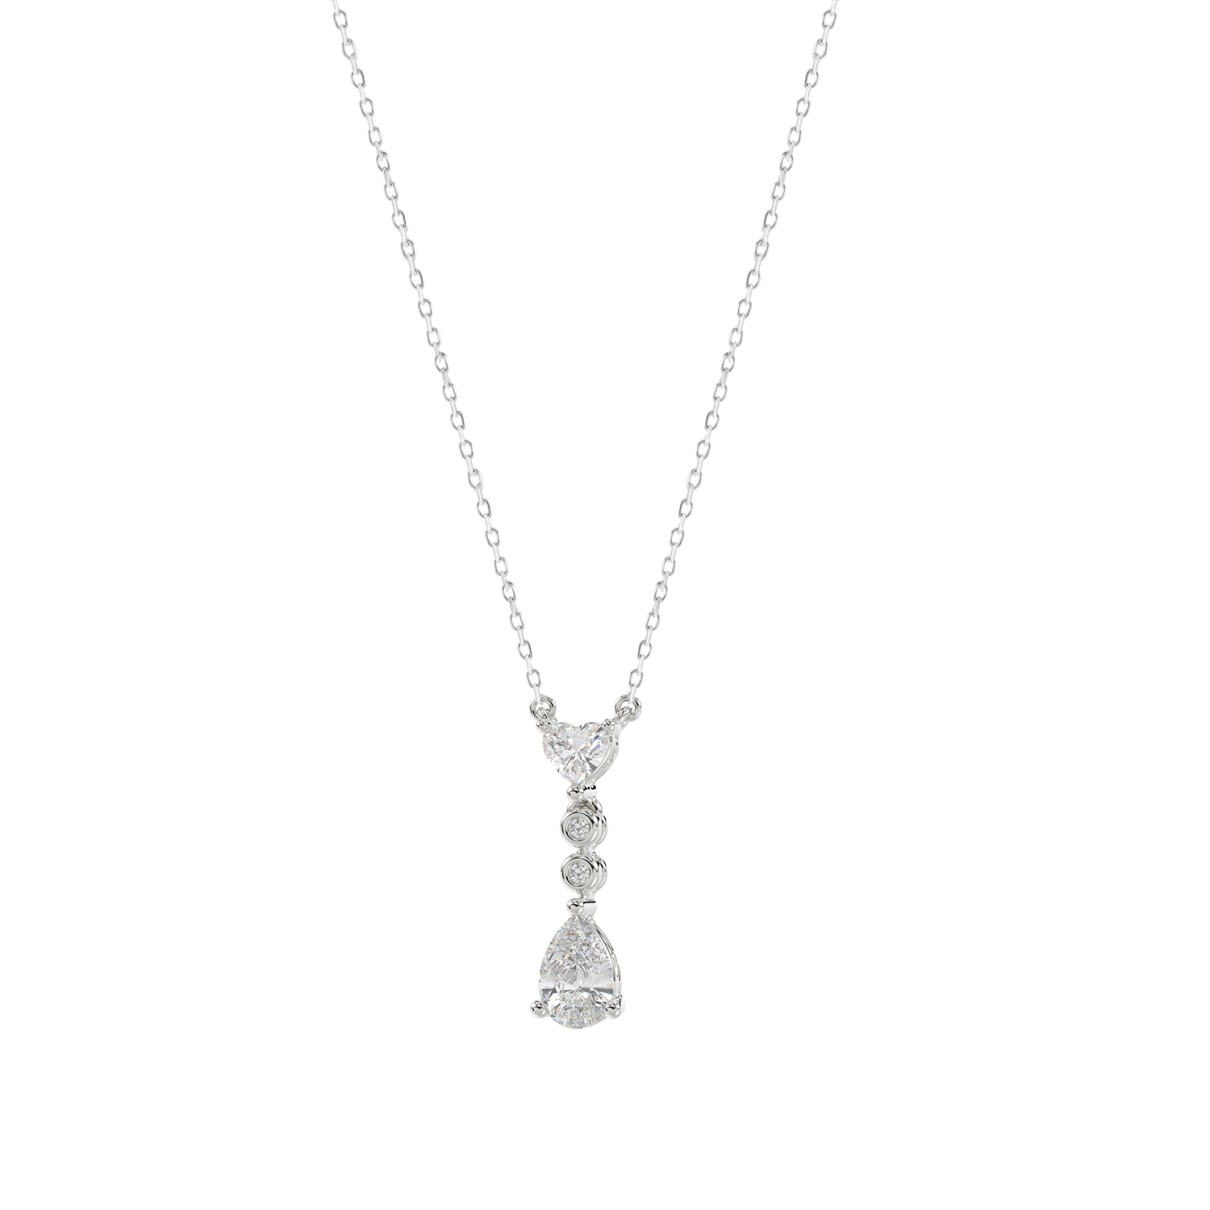 LADIES NECKLACE 3/4CT ROUND/PEAR/HEART DIAMOND 14K WHITE GOLD WITH CHAIN